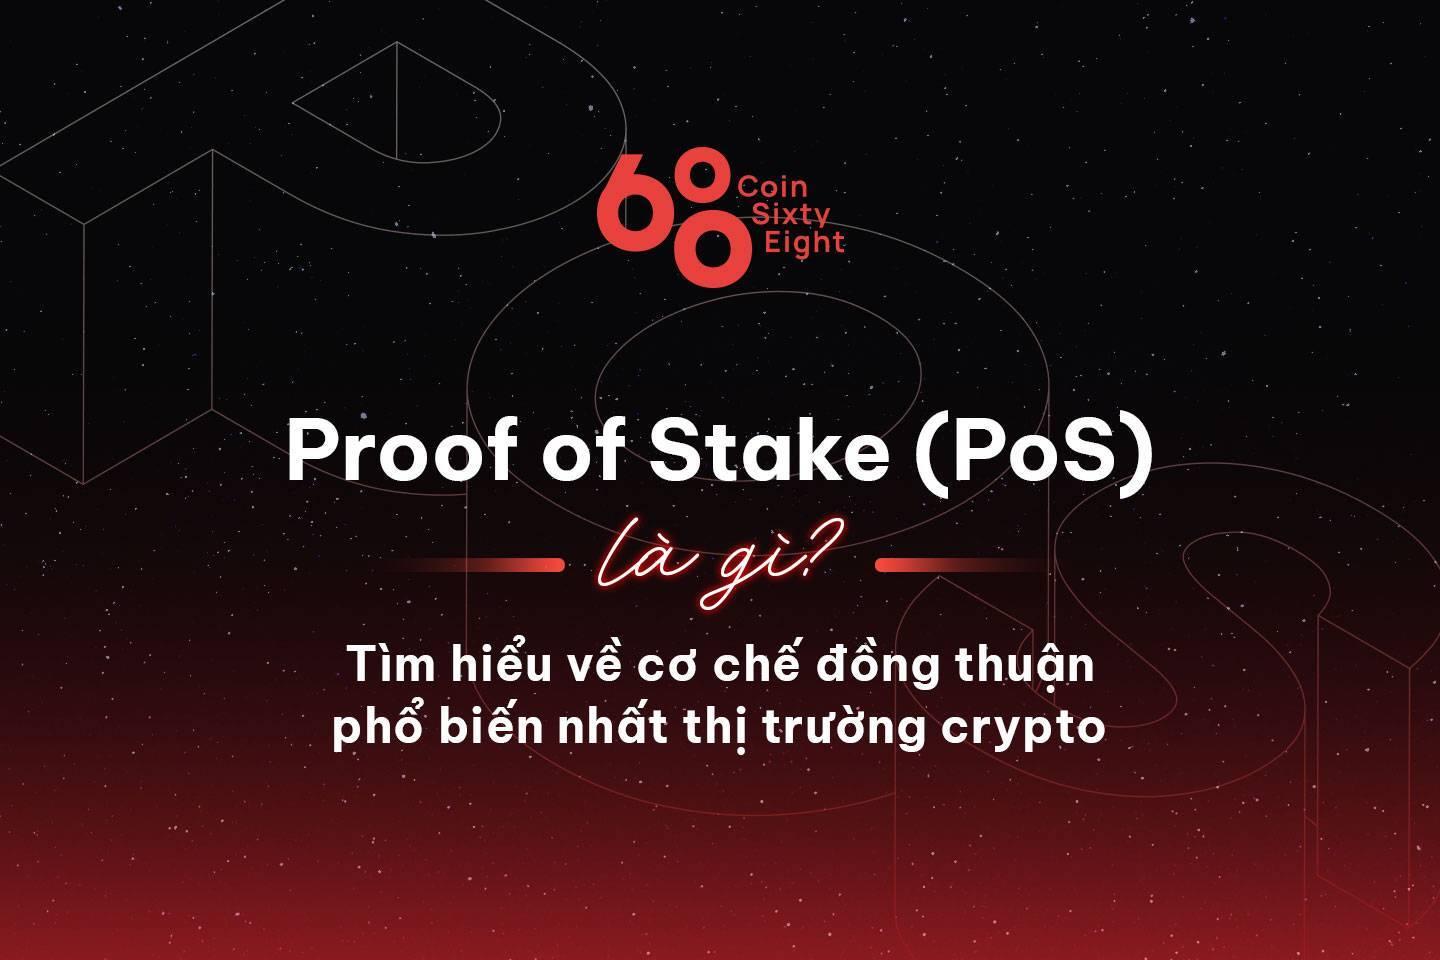 proof-of-stake-pos-la-gi-tim-hieu-ve-co-che-dong-thuan-pho-bien-nhat-thi-truong-crypto